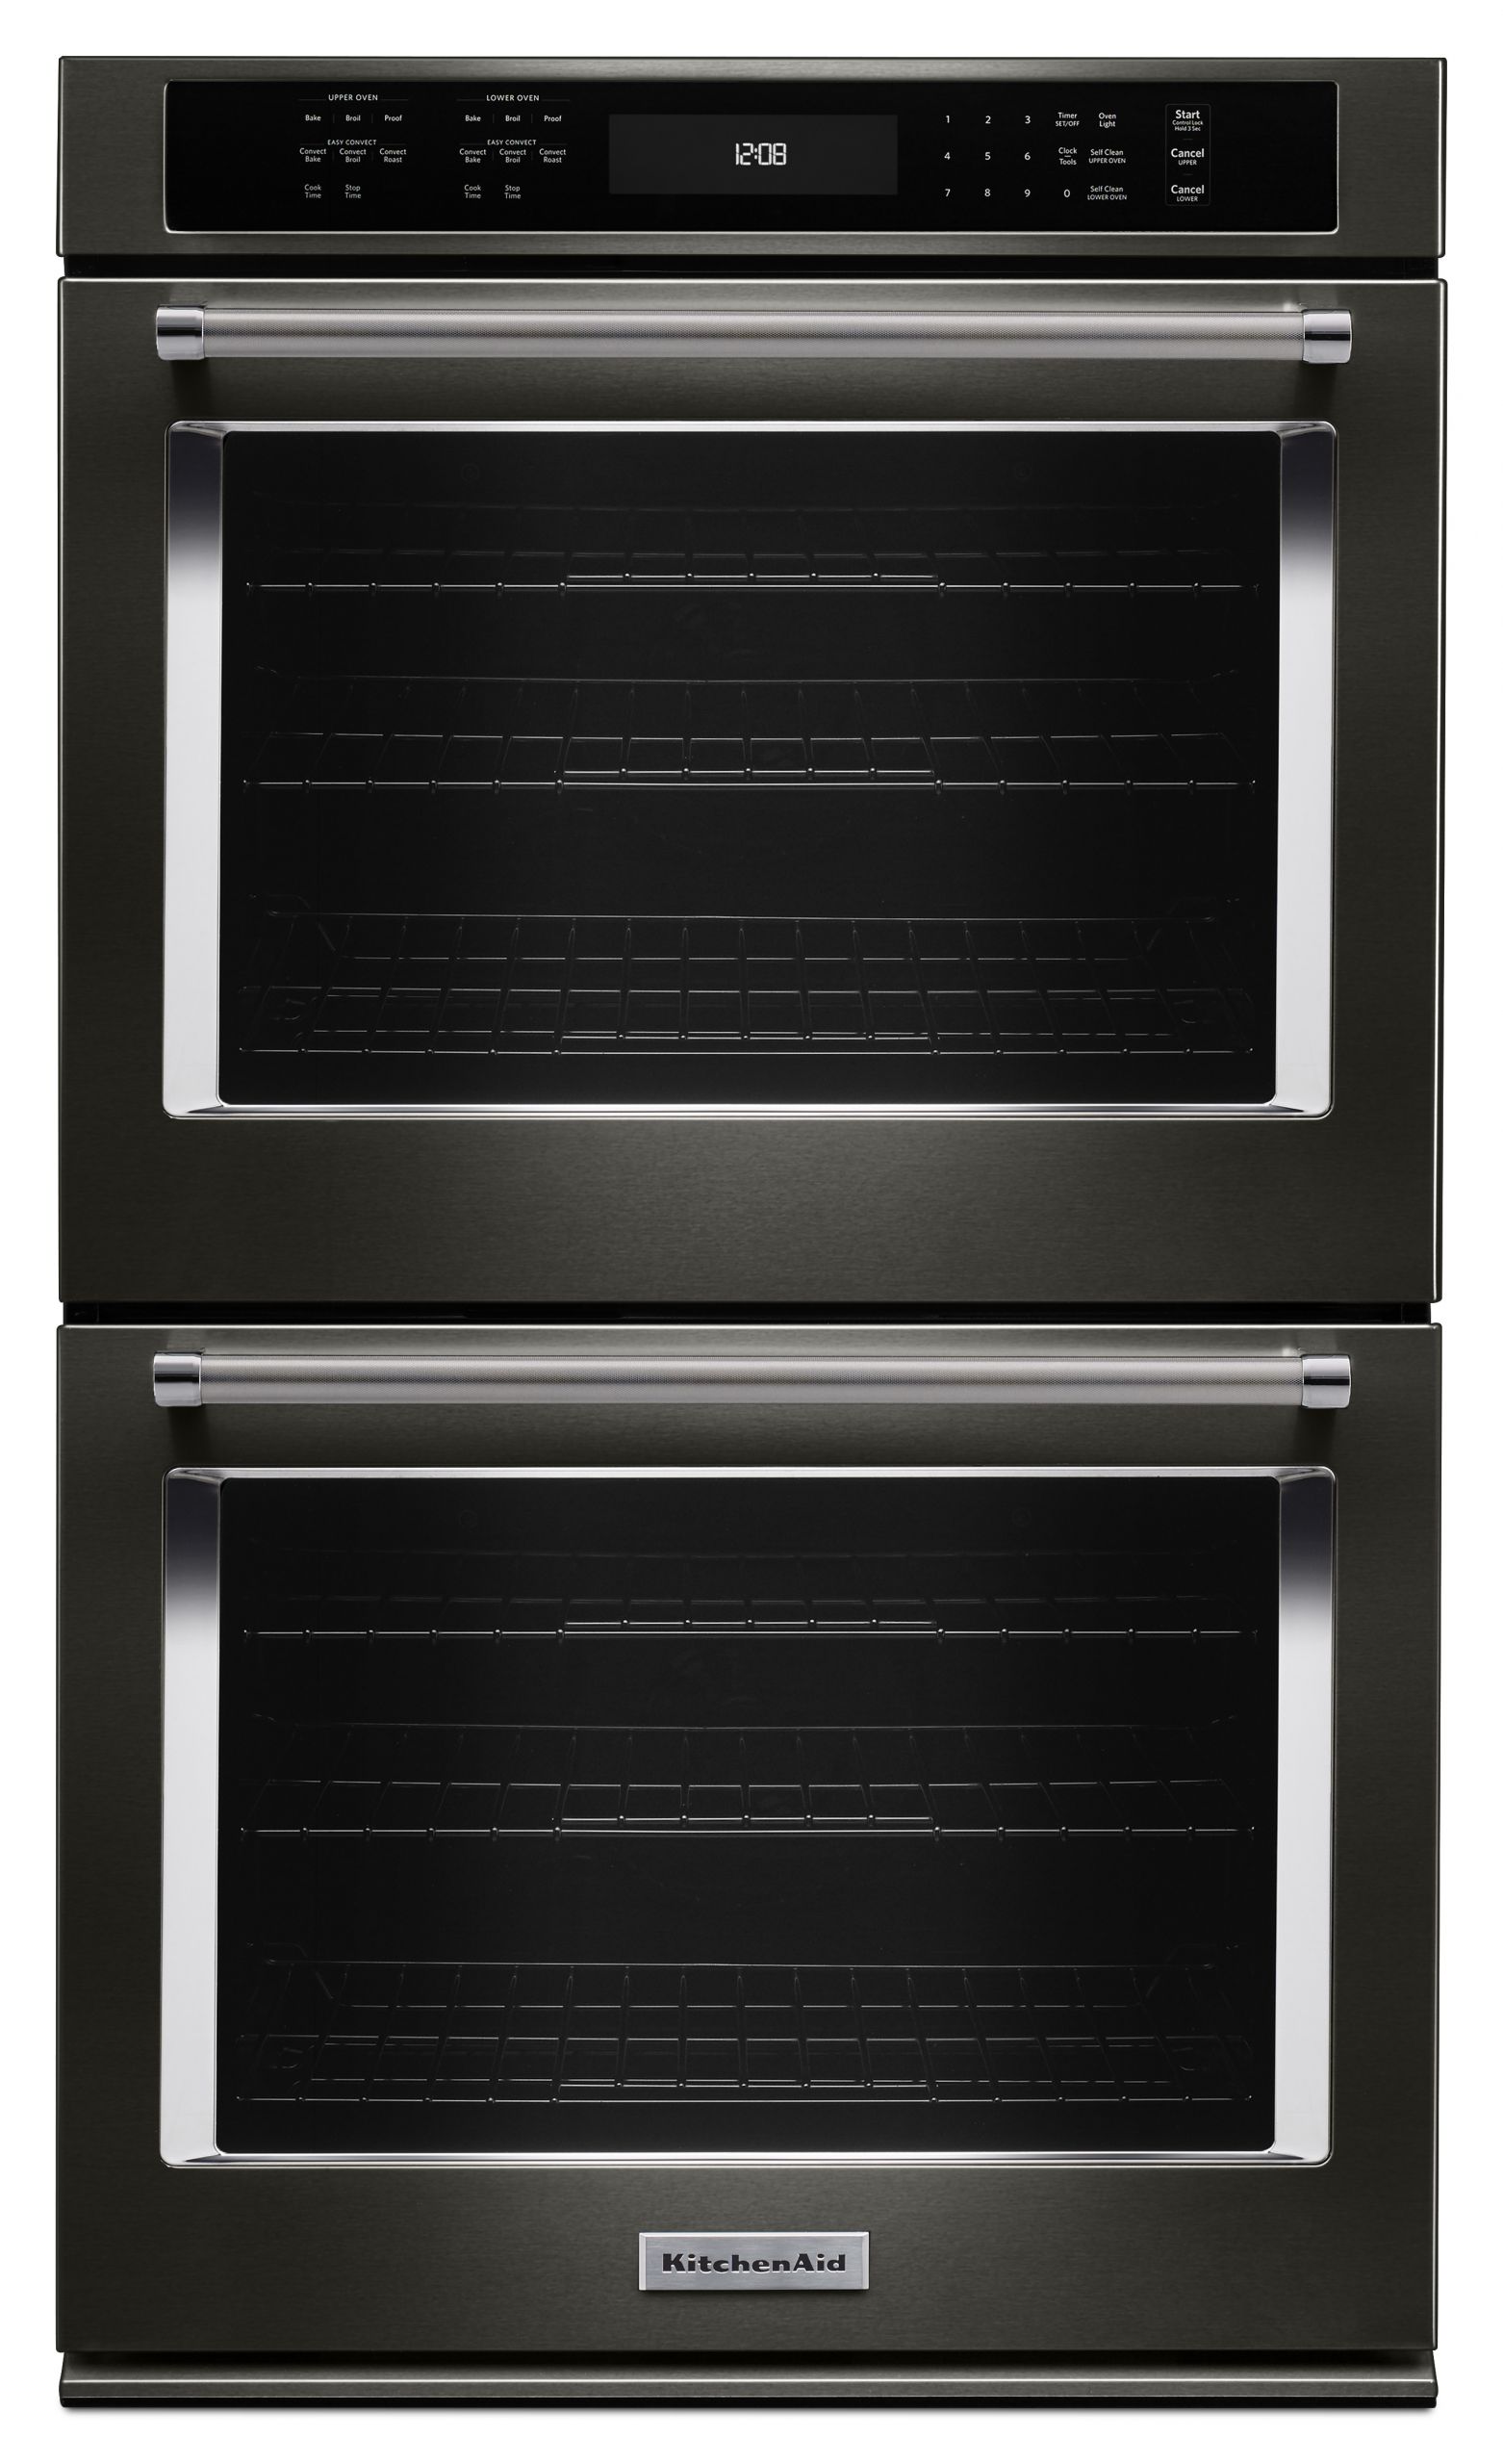 Kitchen Aid Wall Oven
 KitchenAid KODE507EBS 27" Double Wall Oven w Even Heat